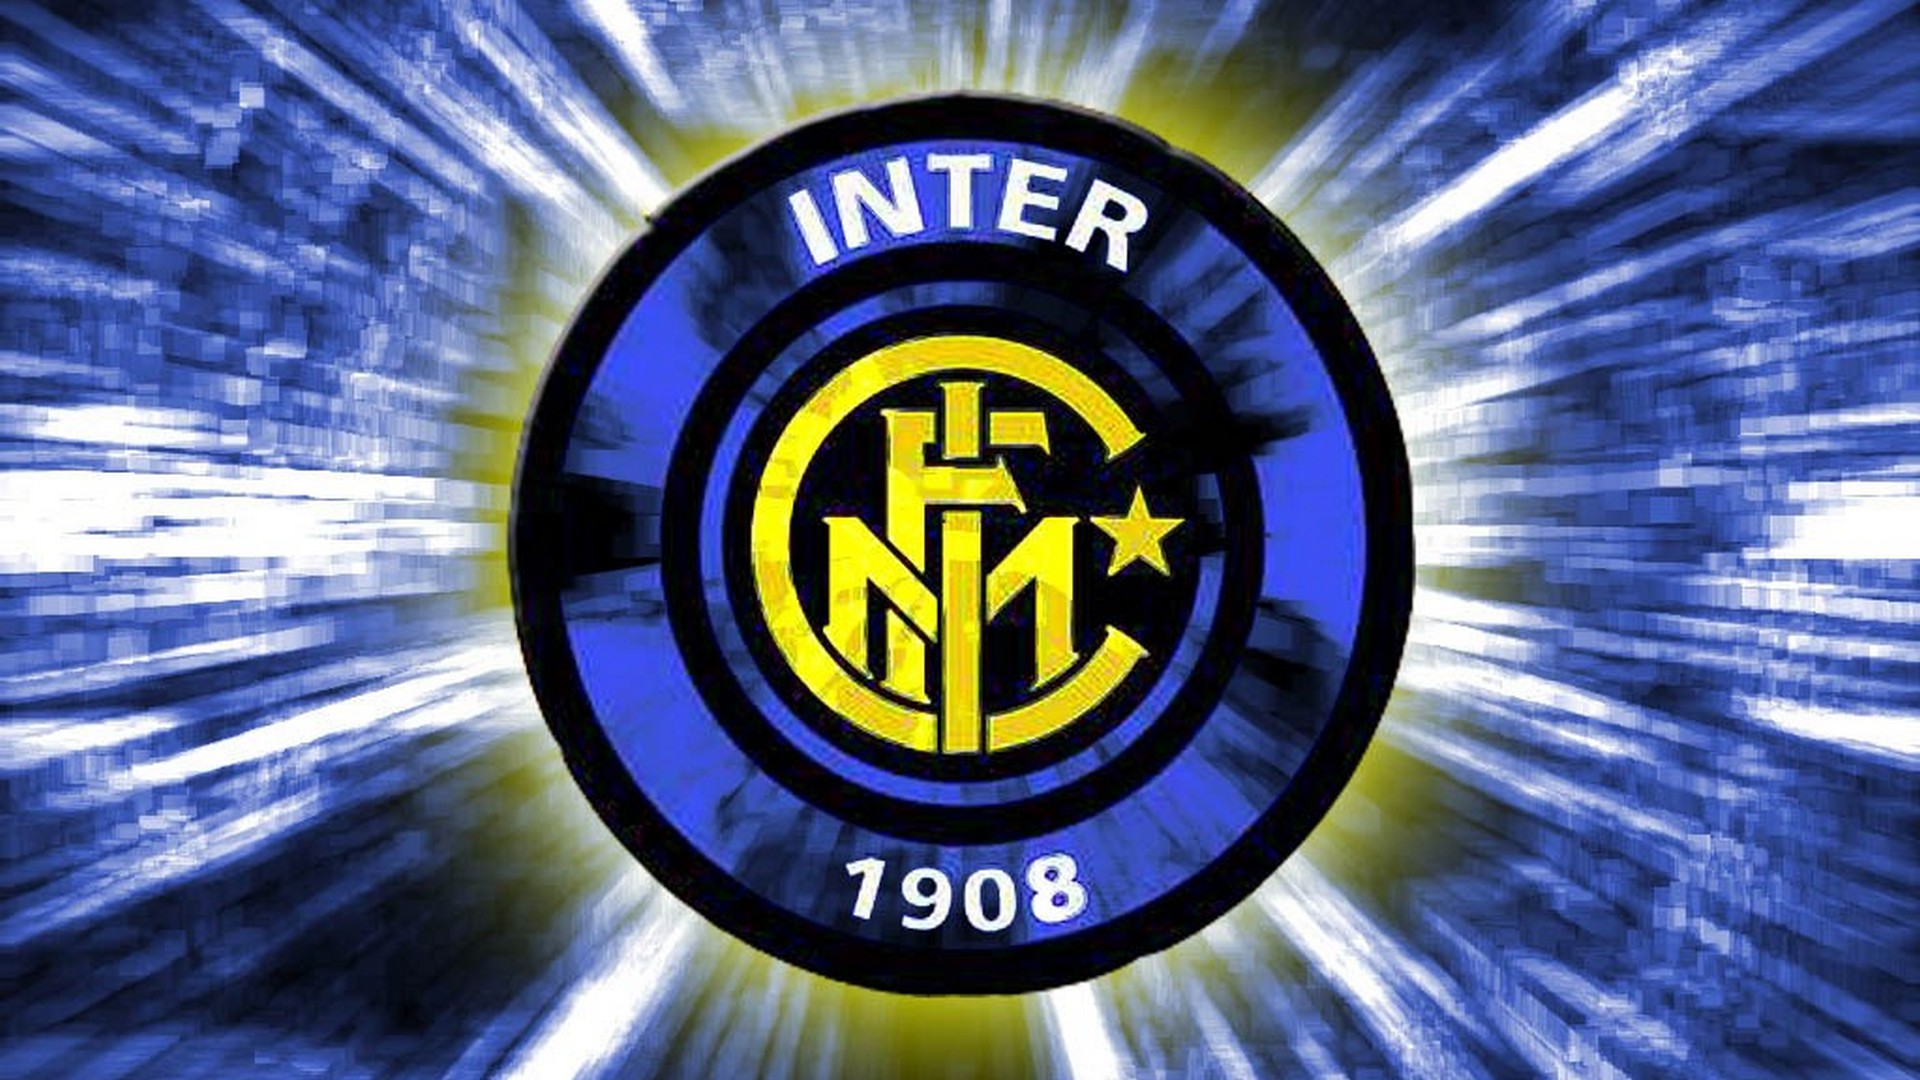 Wallpapers Inter Milan with high-resolution 1920x1080 pixel. You can use this wallpaper for your Desktop Computers, Mac Screensavers, Windows Backgrounds, iPhone Wallpapers, Tablet or Android Lock screen and another Mobile device